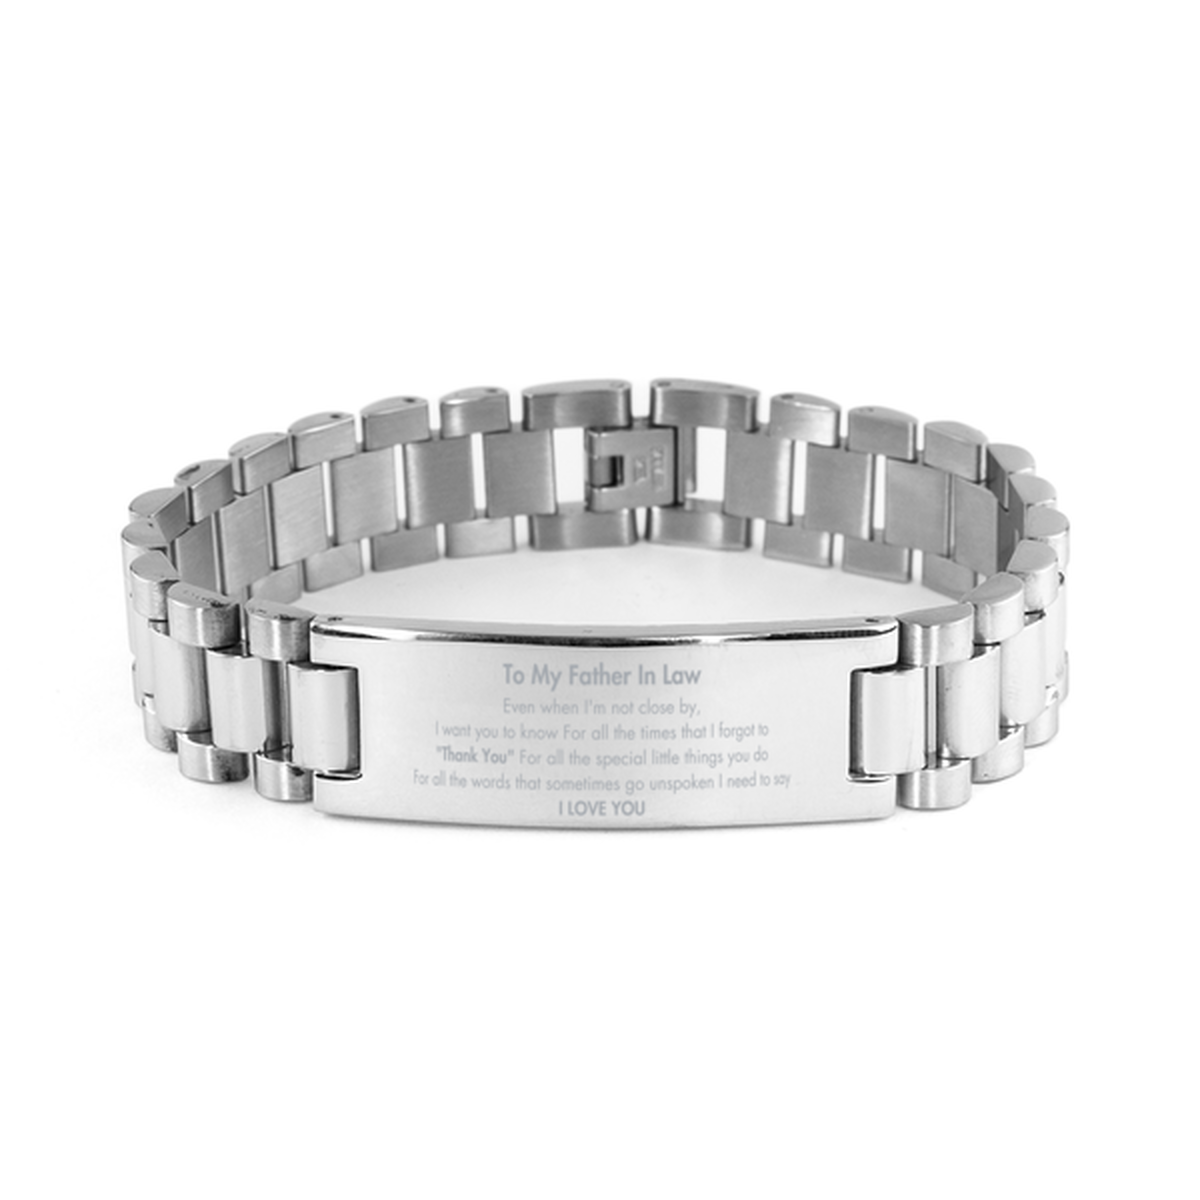 Thank You Gifts for Father In Law, Keepsake Ladder Stainless Steel Bracelet Gifts for Father In Law Birthday Mother's day Father's Day Father In Law For all the words That sometimes go unspoken I need to say I LOVE YOU